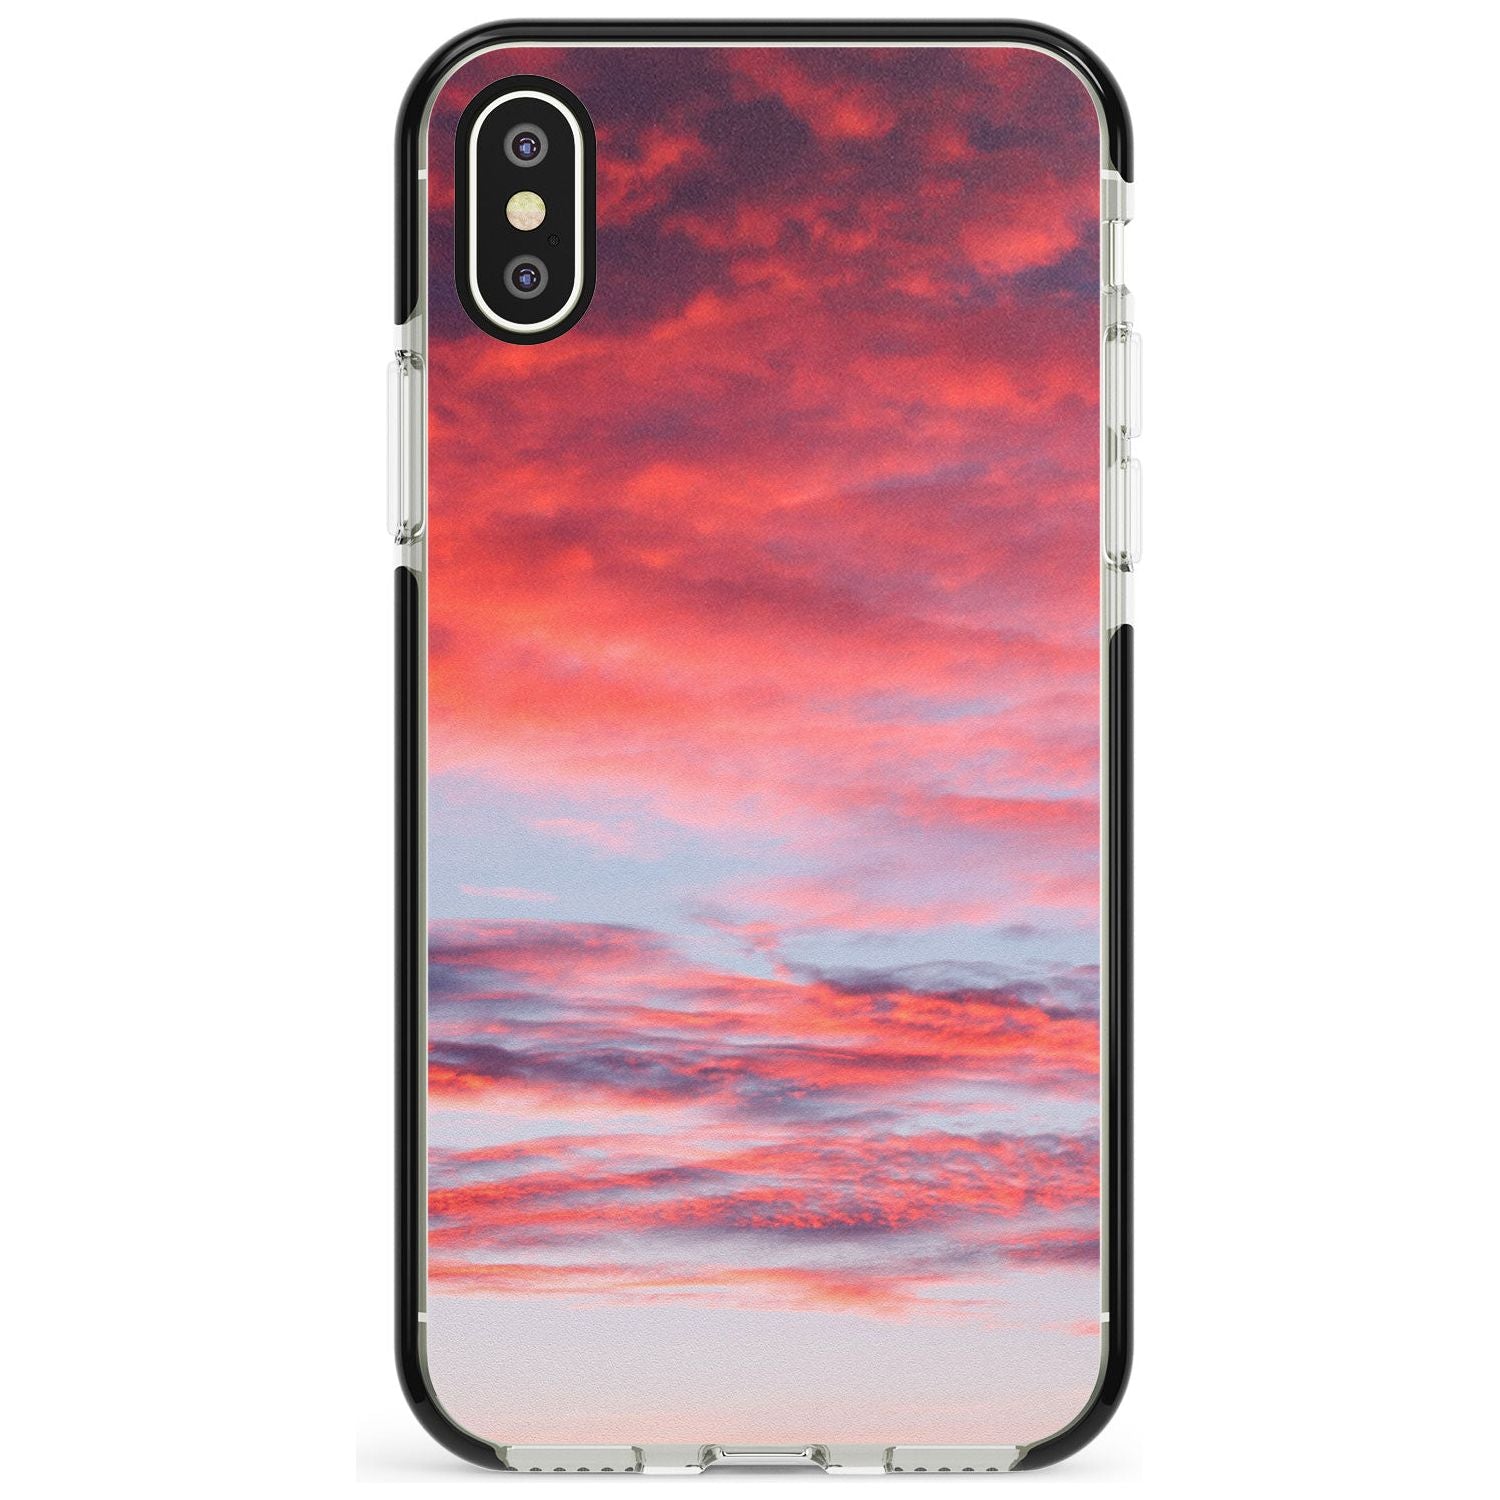 Pink Cloudy Sunset Photograph Black Impact Phone Case for iPhone X XS Max XR